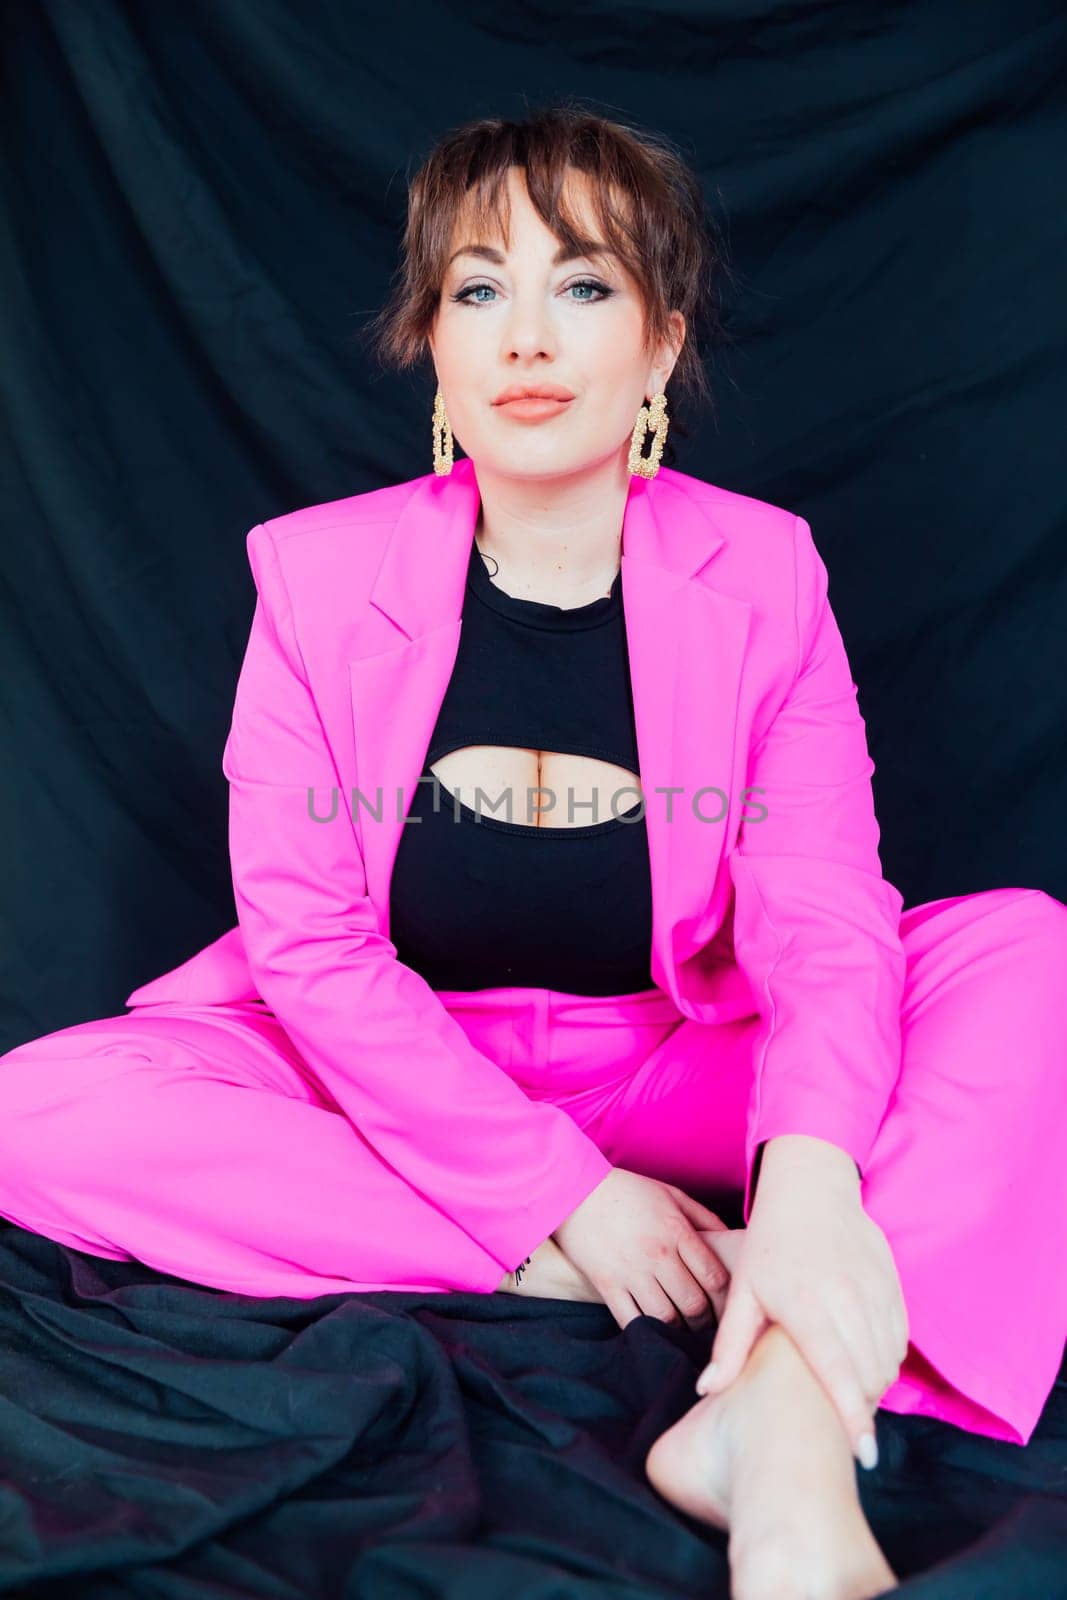 Woman sitting in bright suit on black background by Simakov